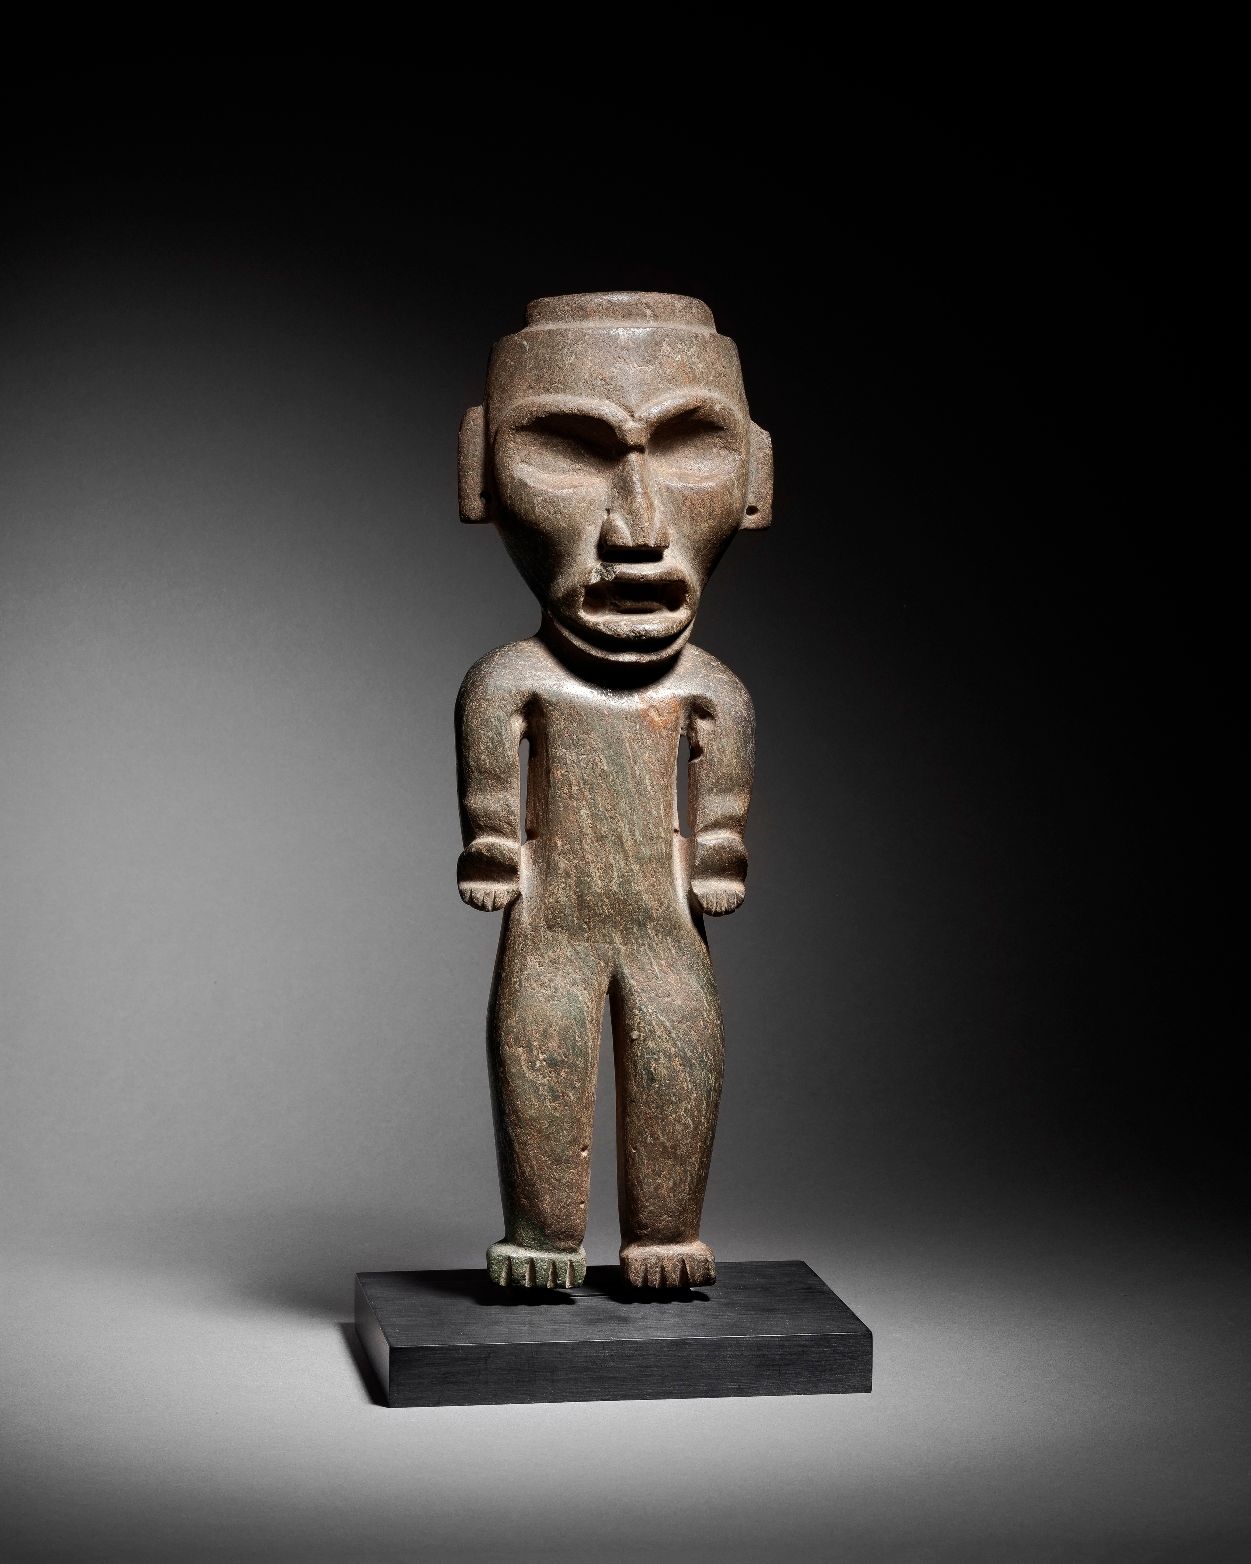 Null STANDING FIGURE
PRE-TEOTIHUACAN CULTURE,
STATE OF GUERRERO, MEXICO
RECENT P&hellip;